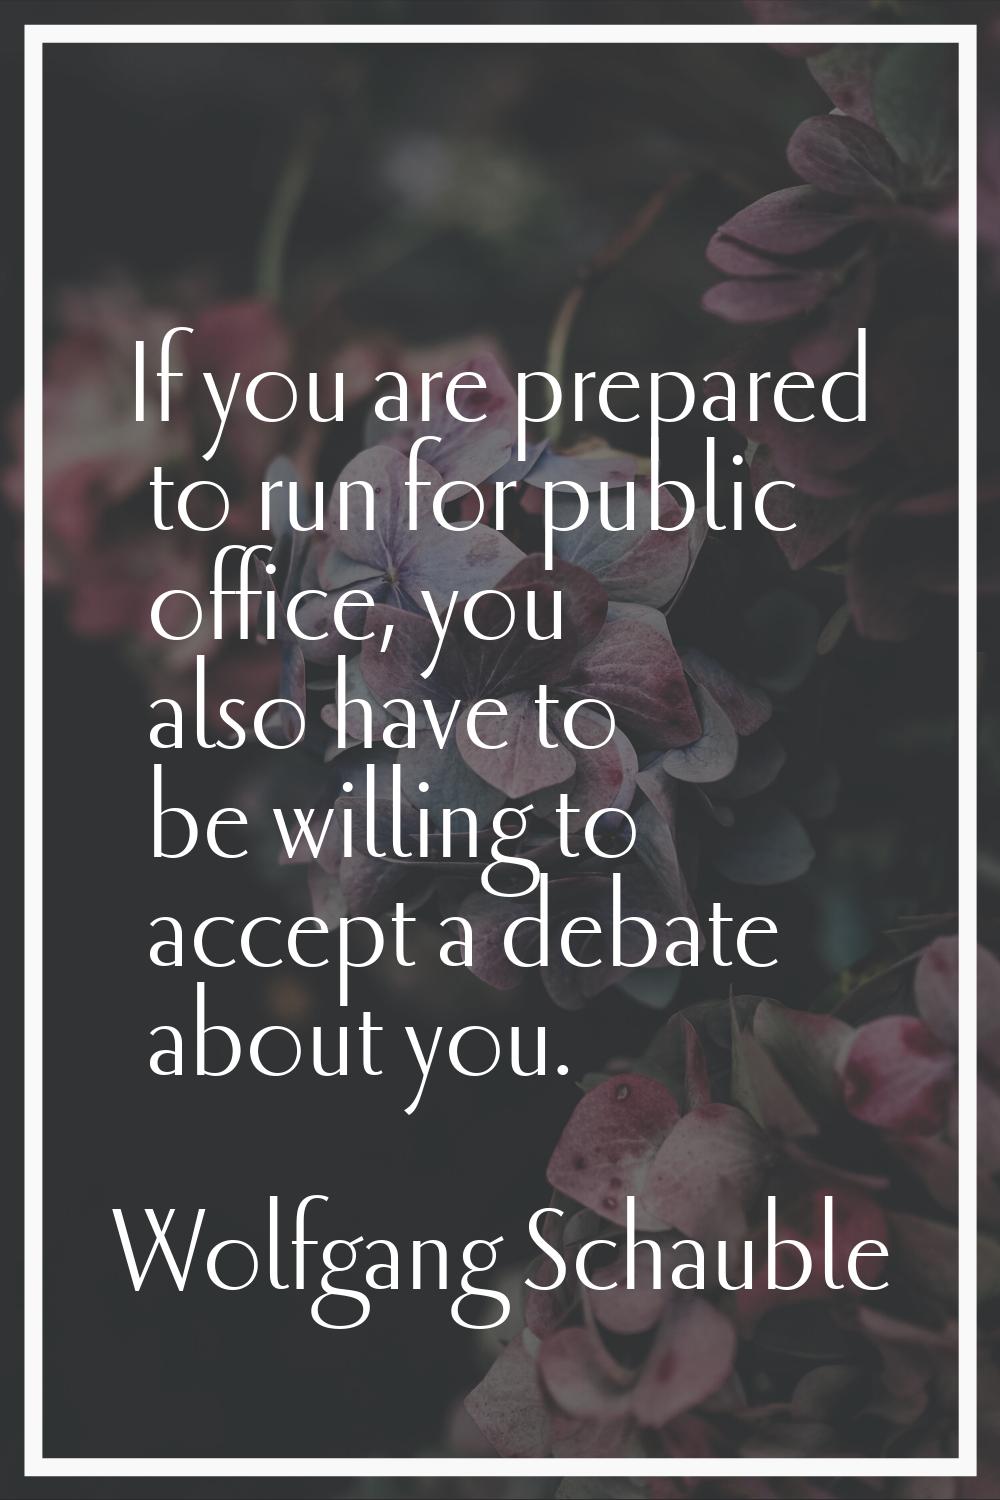 If you are prepared to run for public office, you also have to be willing to accept a debate about 